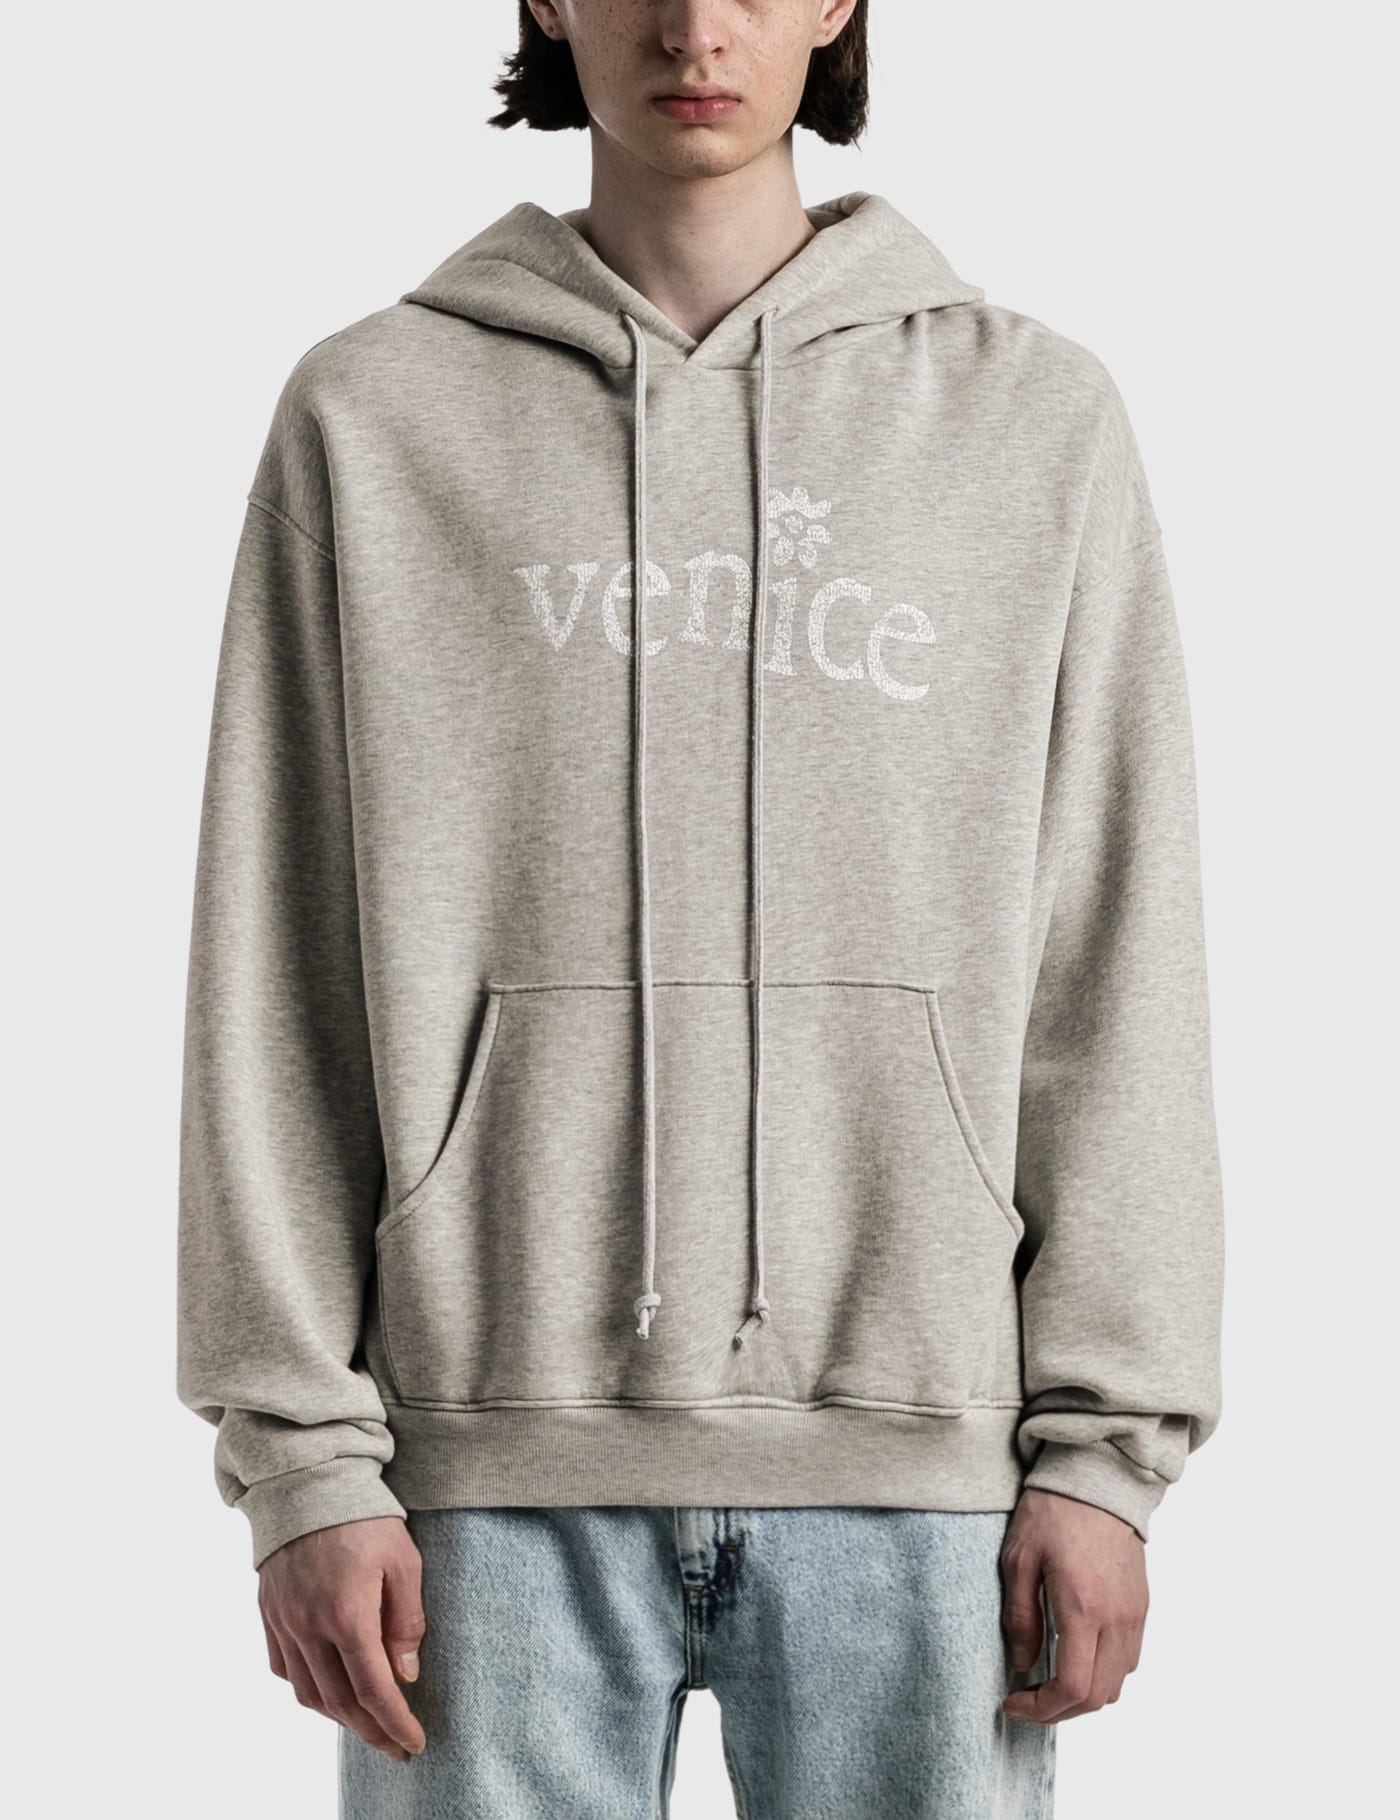 ERL - Venice Hoodie | HBX - Globally Curated Fashion and Lifestyle 